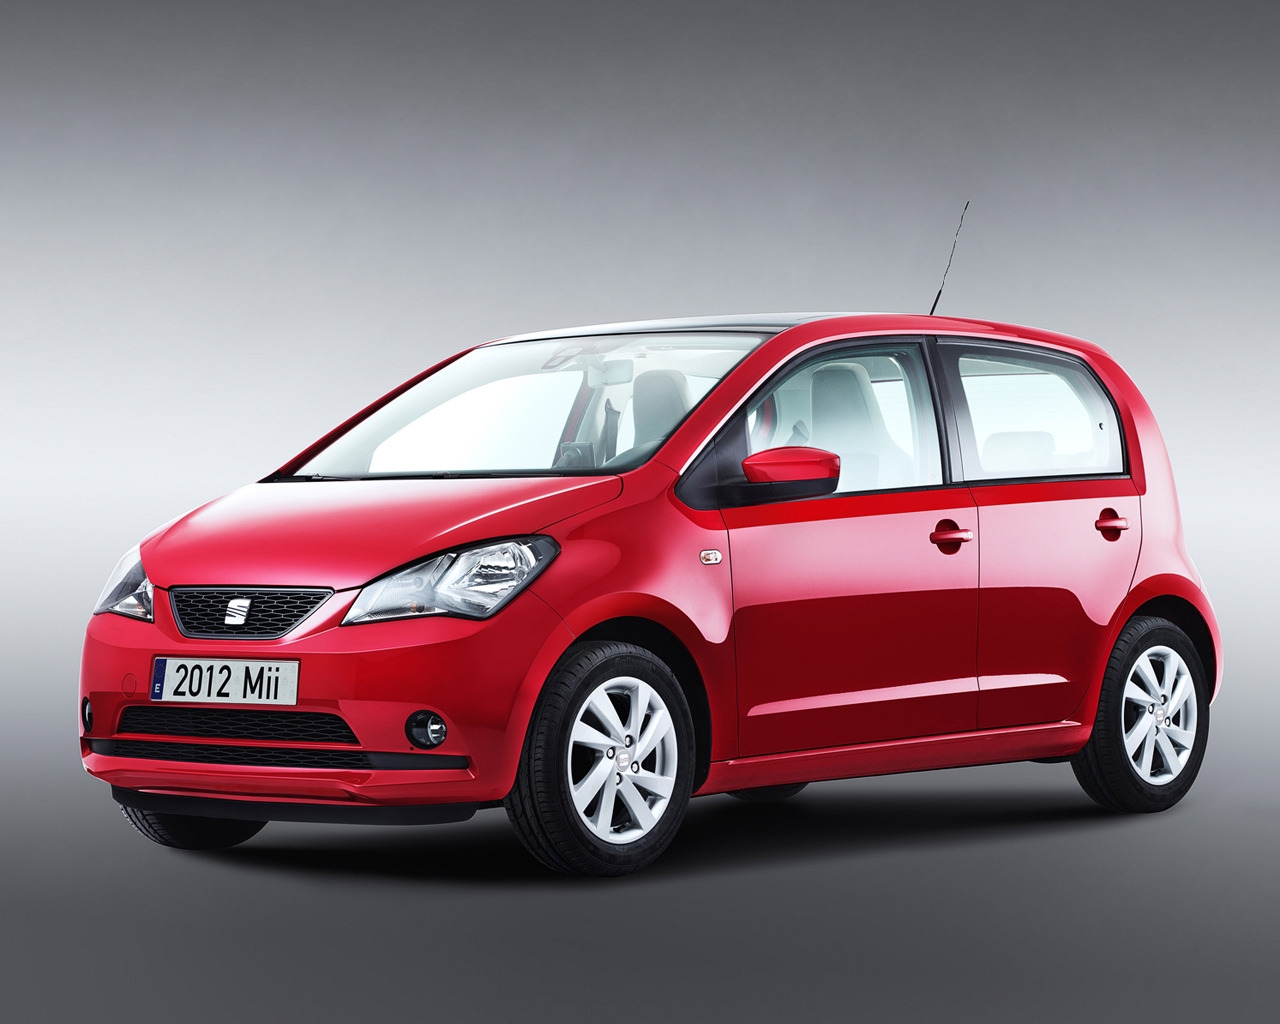 Red Seat Mii Model 2012 for 1280 x 1024 resolution